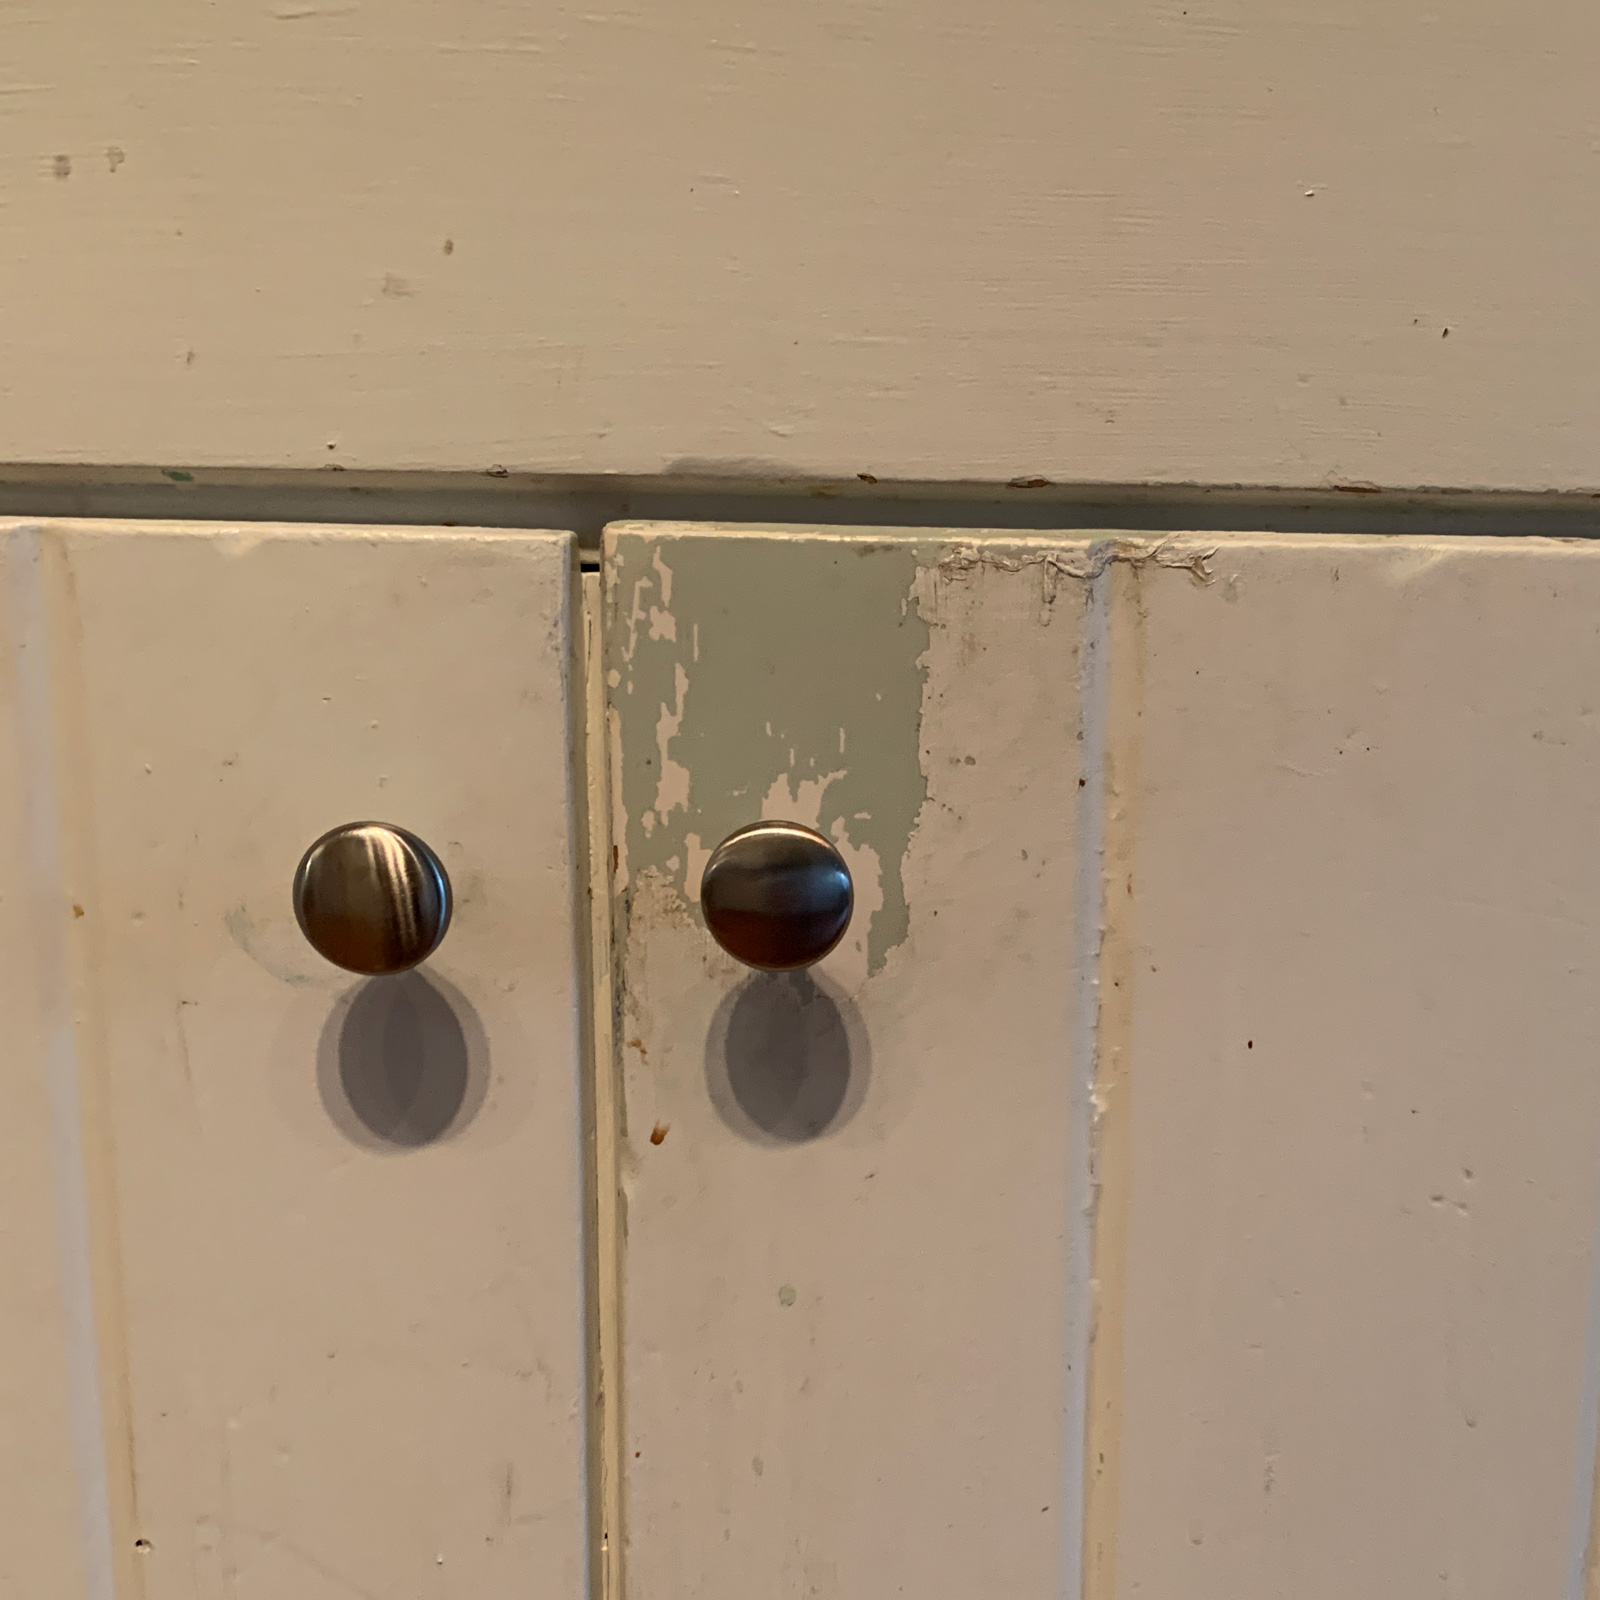 Entry - These old painted cabinets are in desperate need of replacement